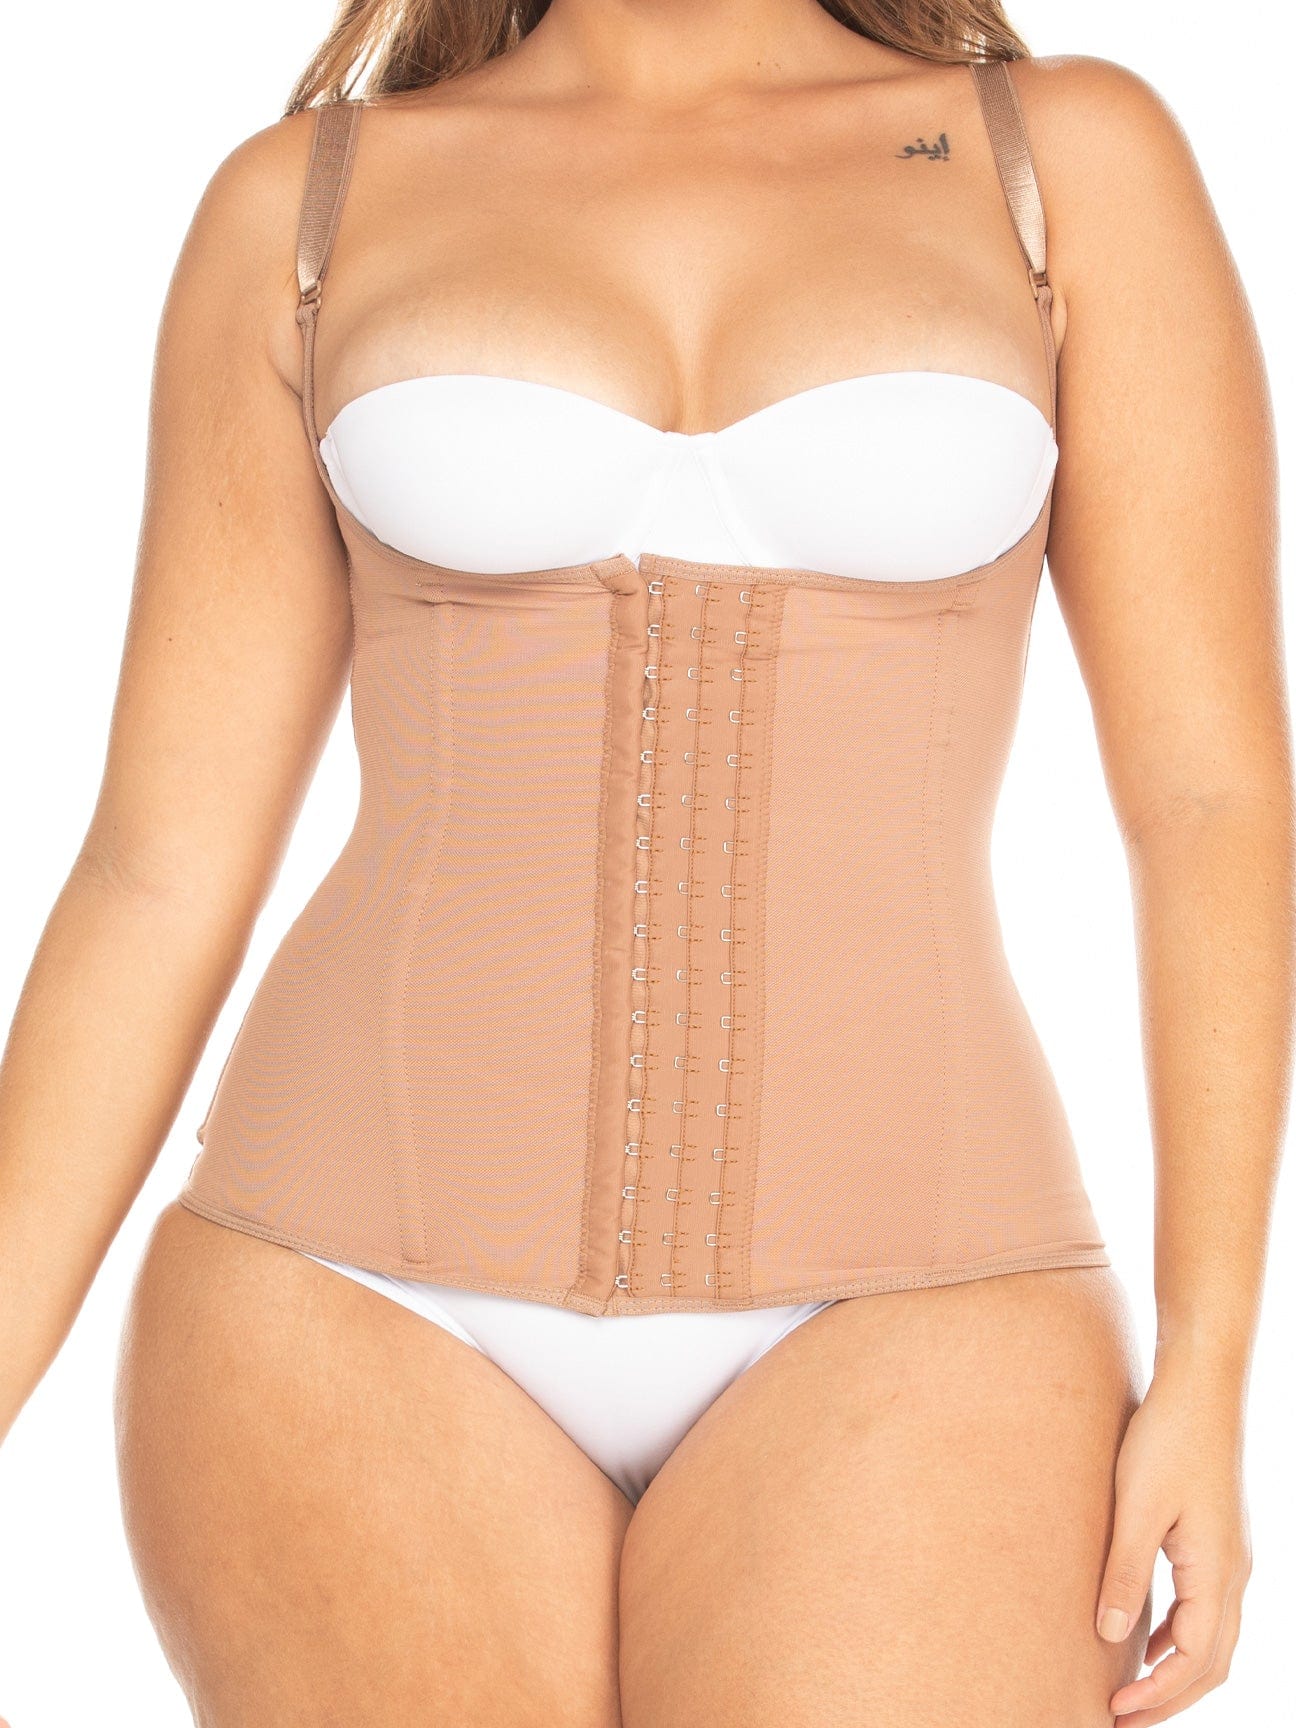 Colombian Waist Trainer Corset For Women Slimming Waist Training Corset  With Sweat Belt For Body Shaping And Reductive Shapewear YAGIMI 20122254p  From Ai828, $24.37